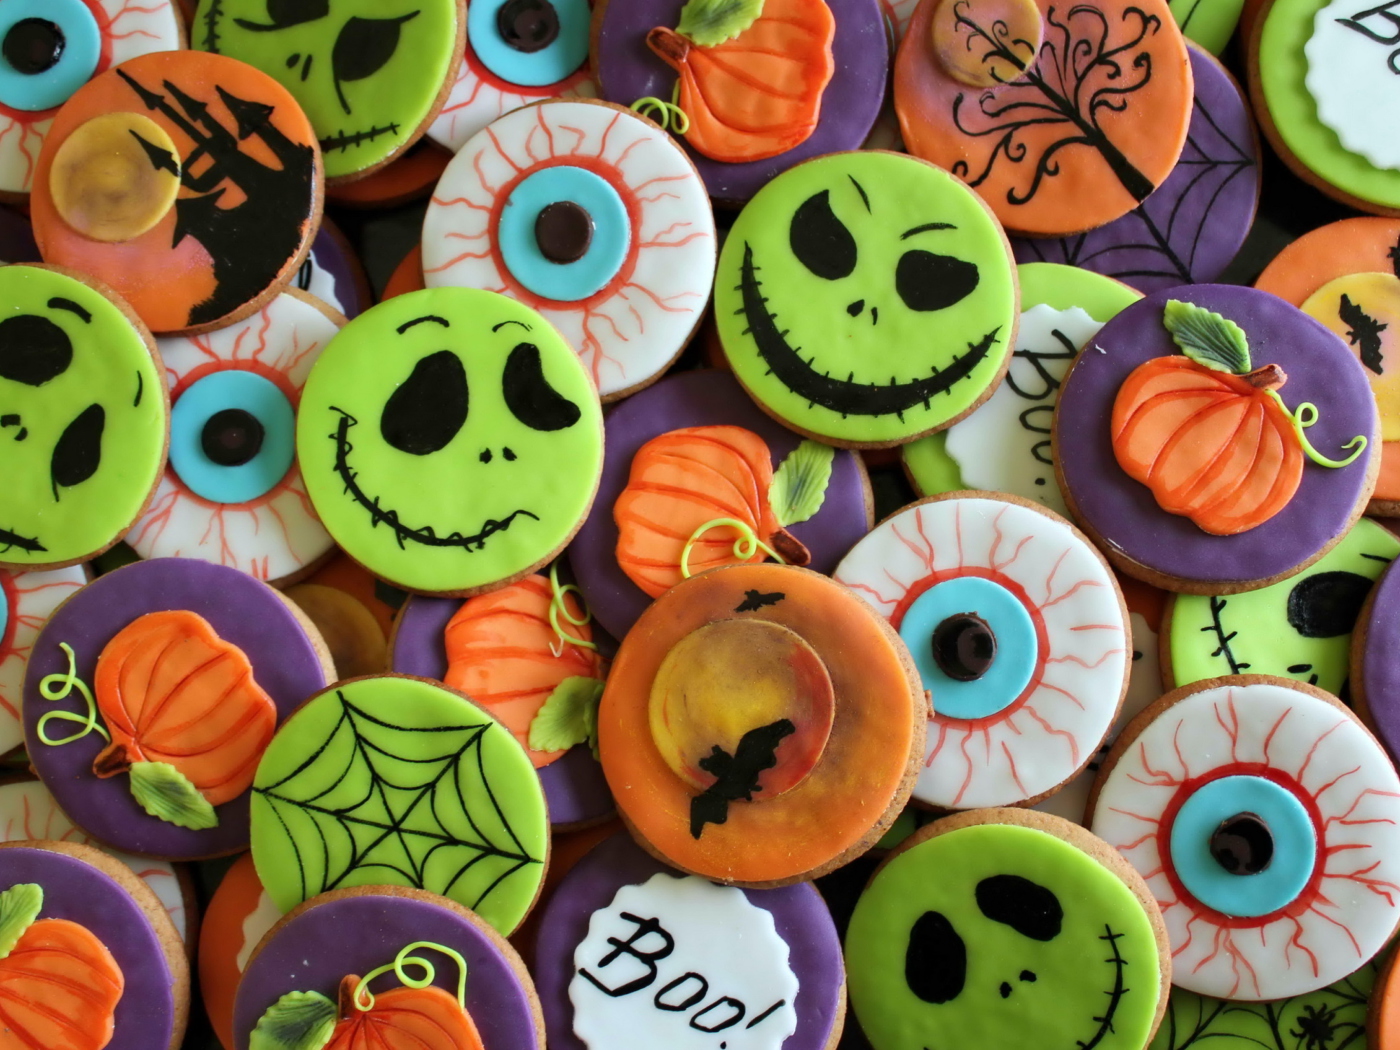 Scary Cookies wallpaper 1400x1050